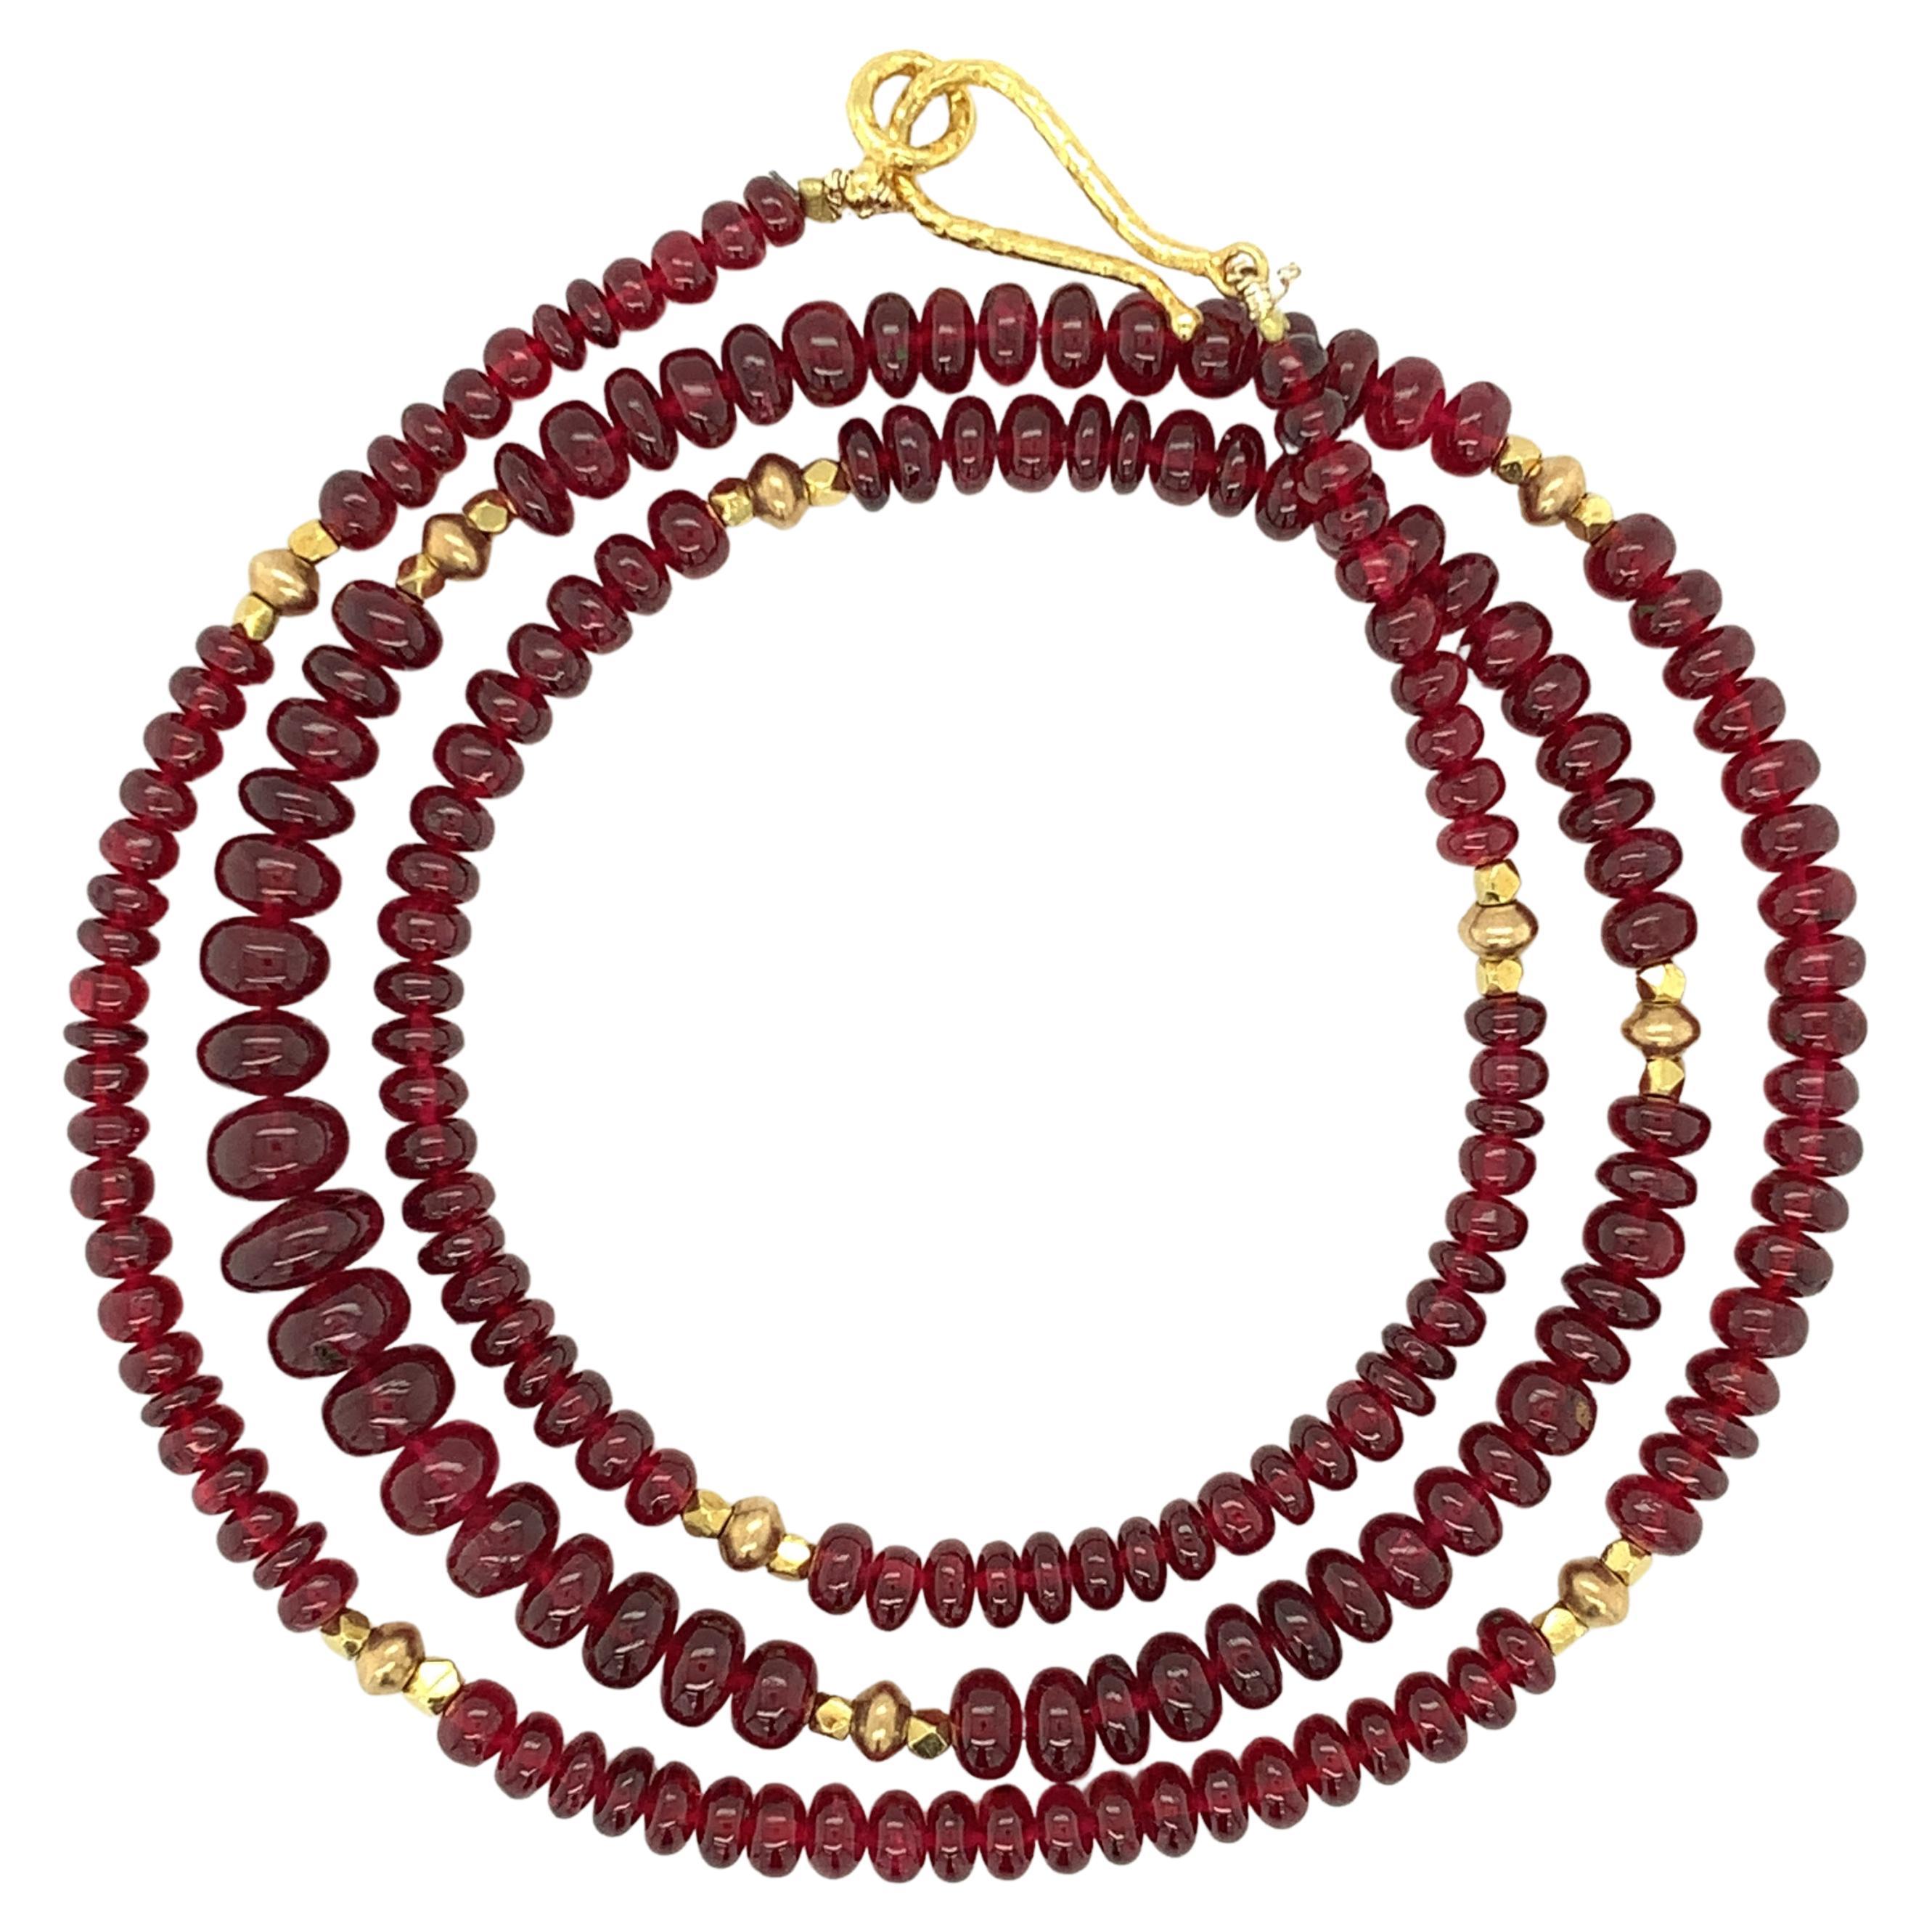 Red Spinel Graduating Bead Necklace with Yellow Gold Spacers, 20 Inches For Sale